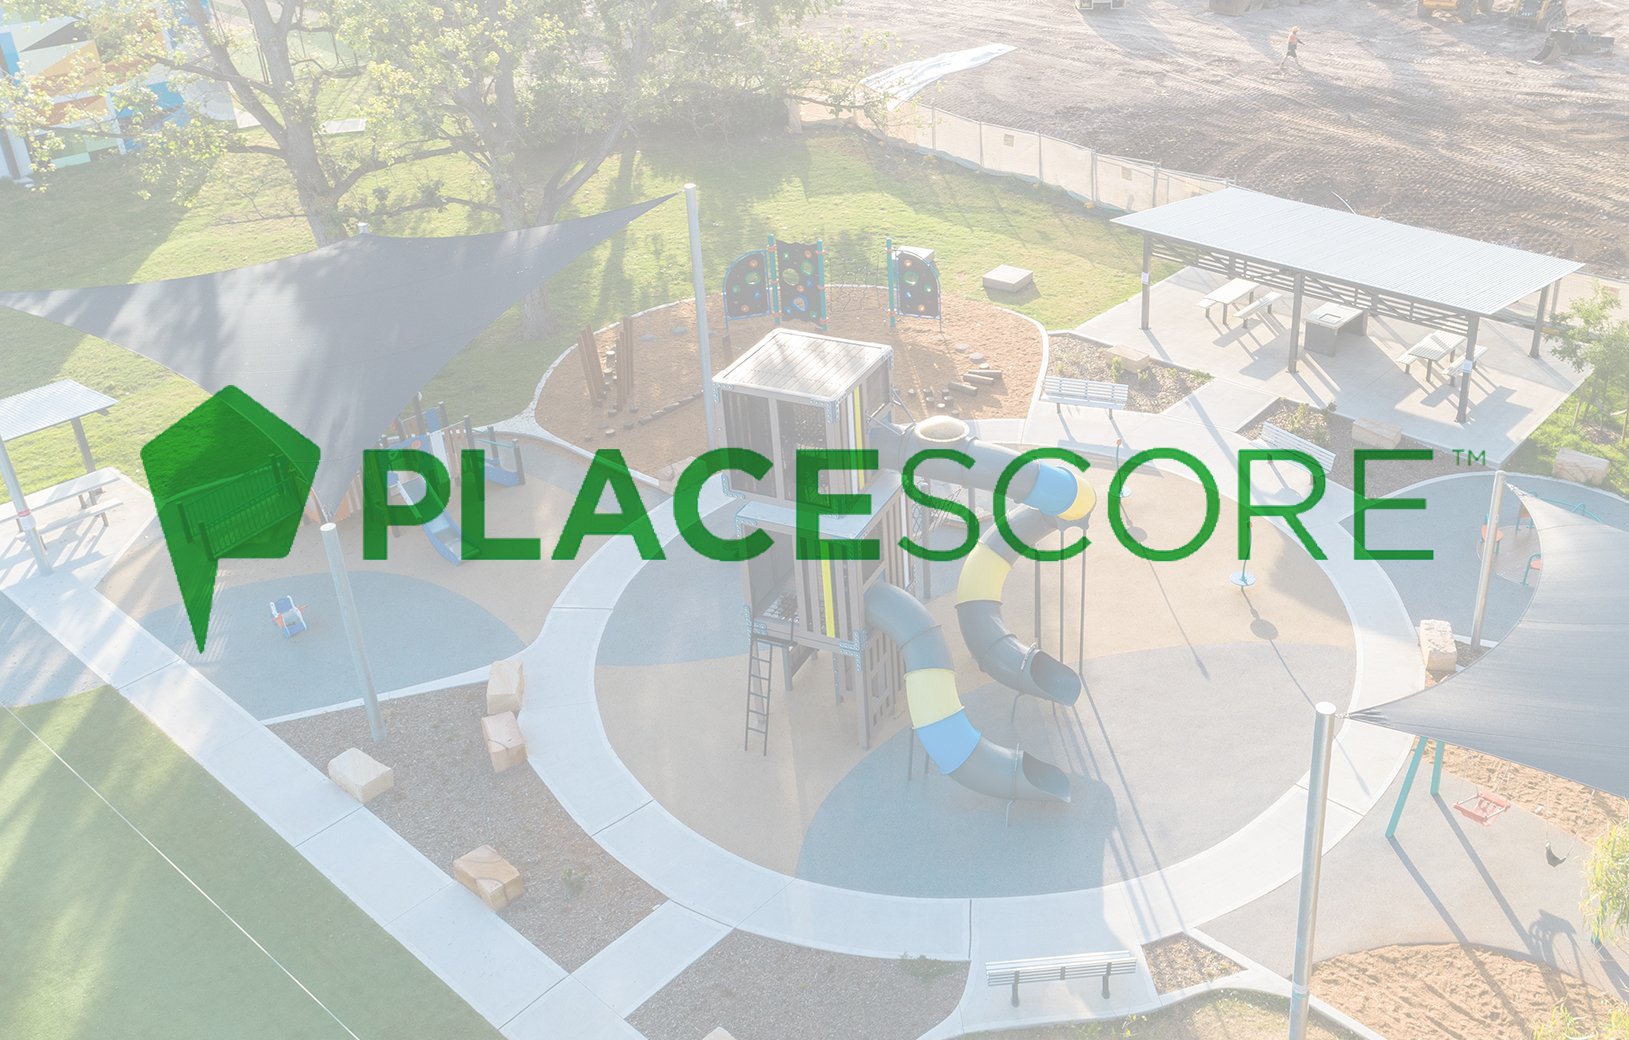 GX Outdoors Partners with Place Score for Innovative Research Project in Parks and Places Industry